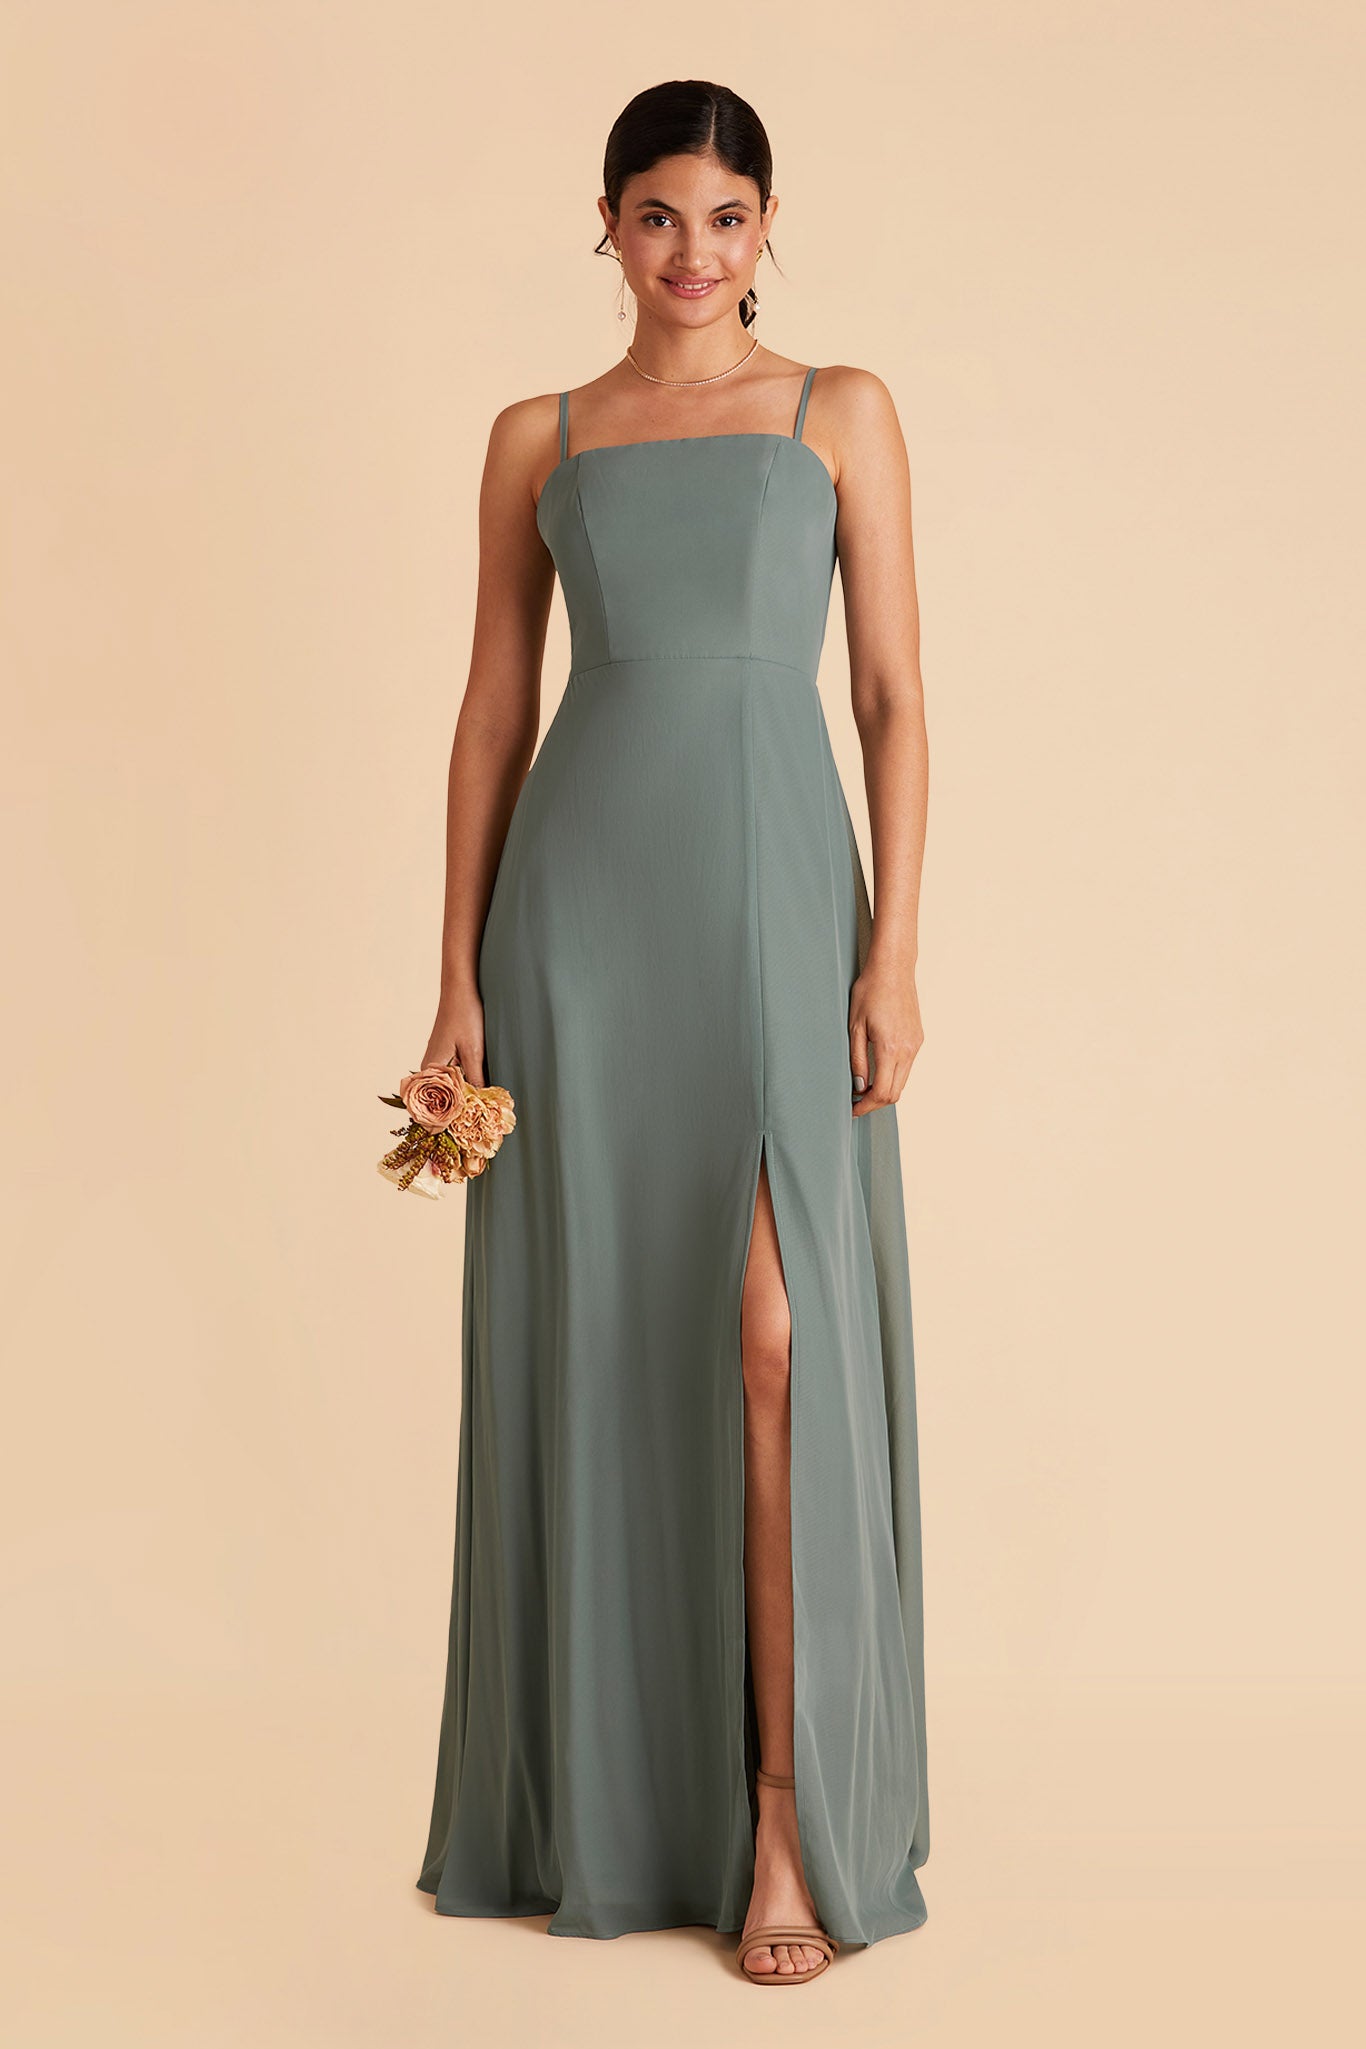 Chris bridesmaid dress with slit in sea glass chiffon by Birdy Grey, front view